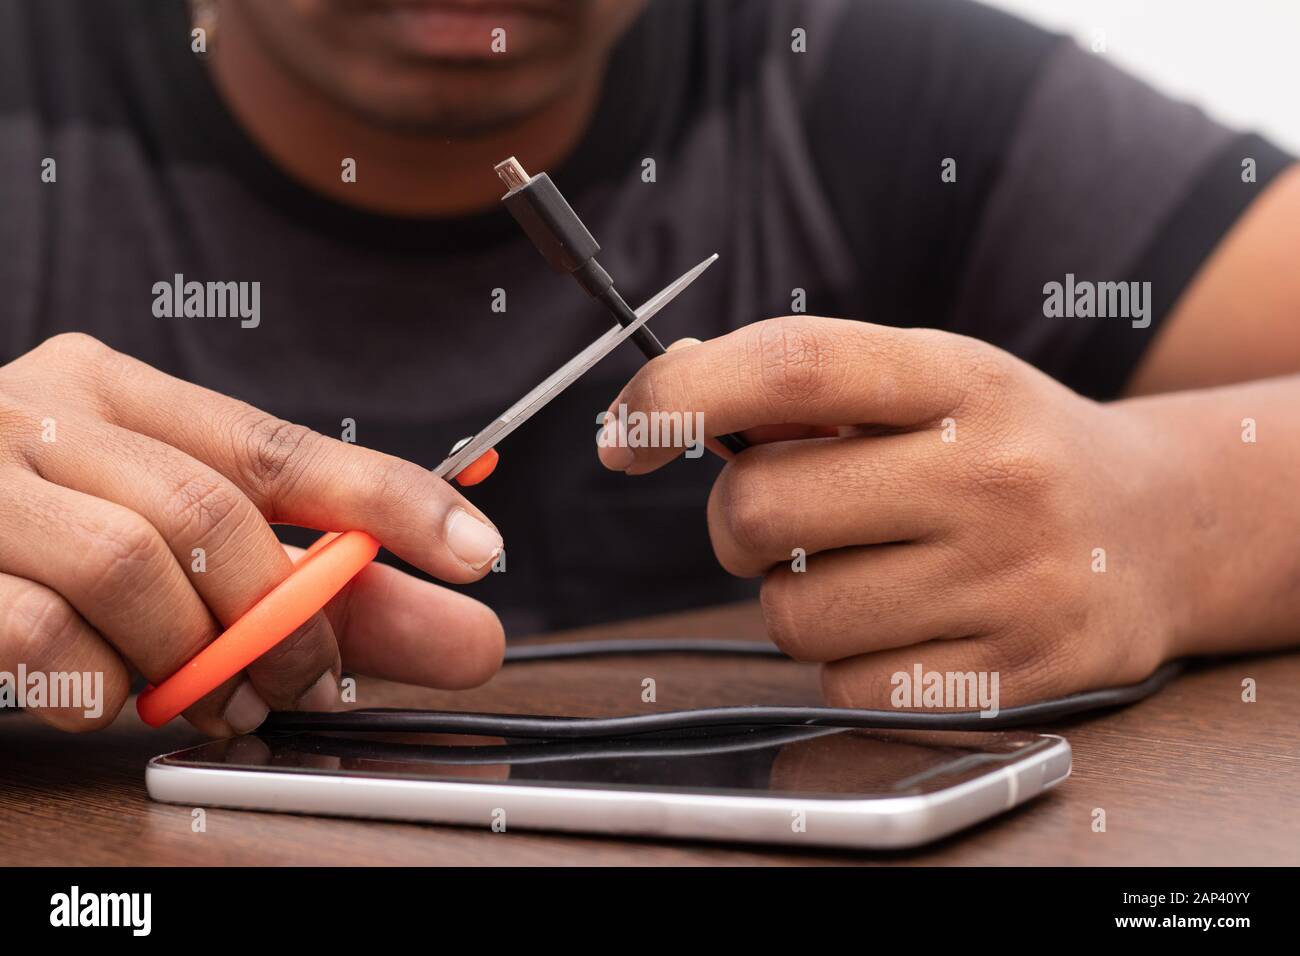 Hands cutting the Micro USB charging and data cable or cord with scissor. Stock Photo